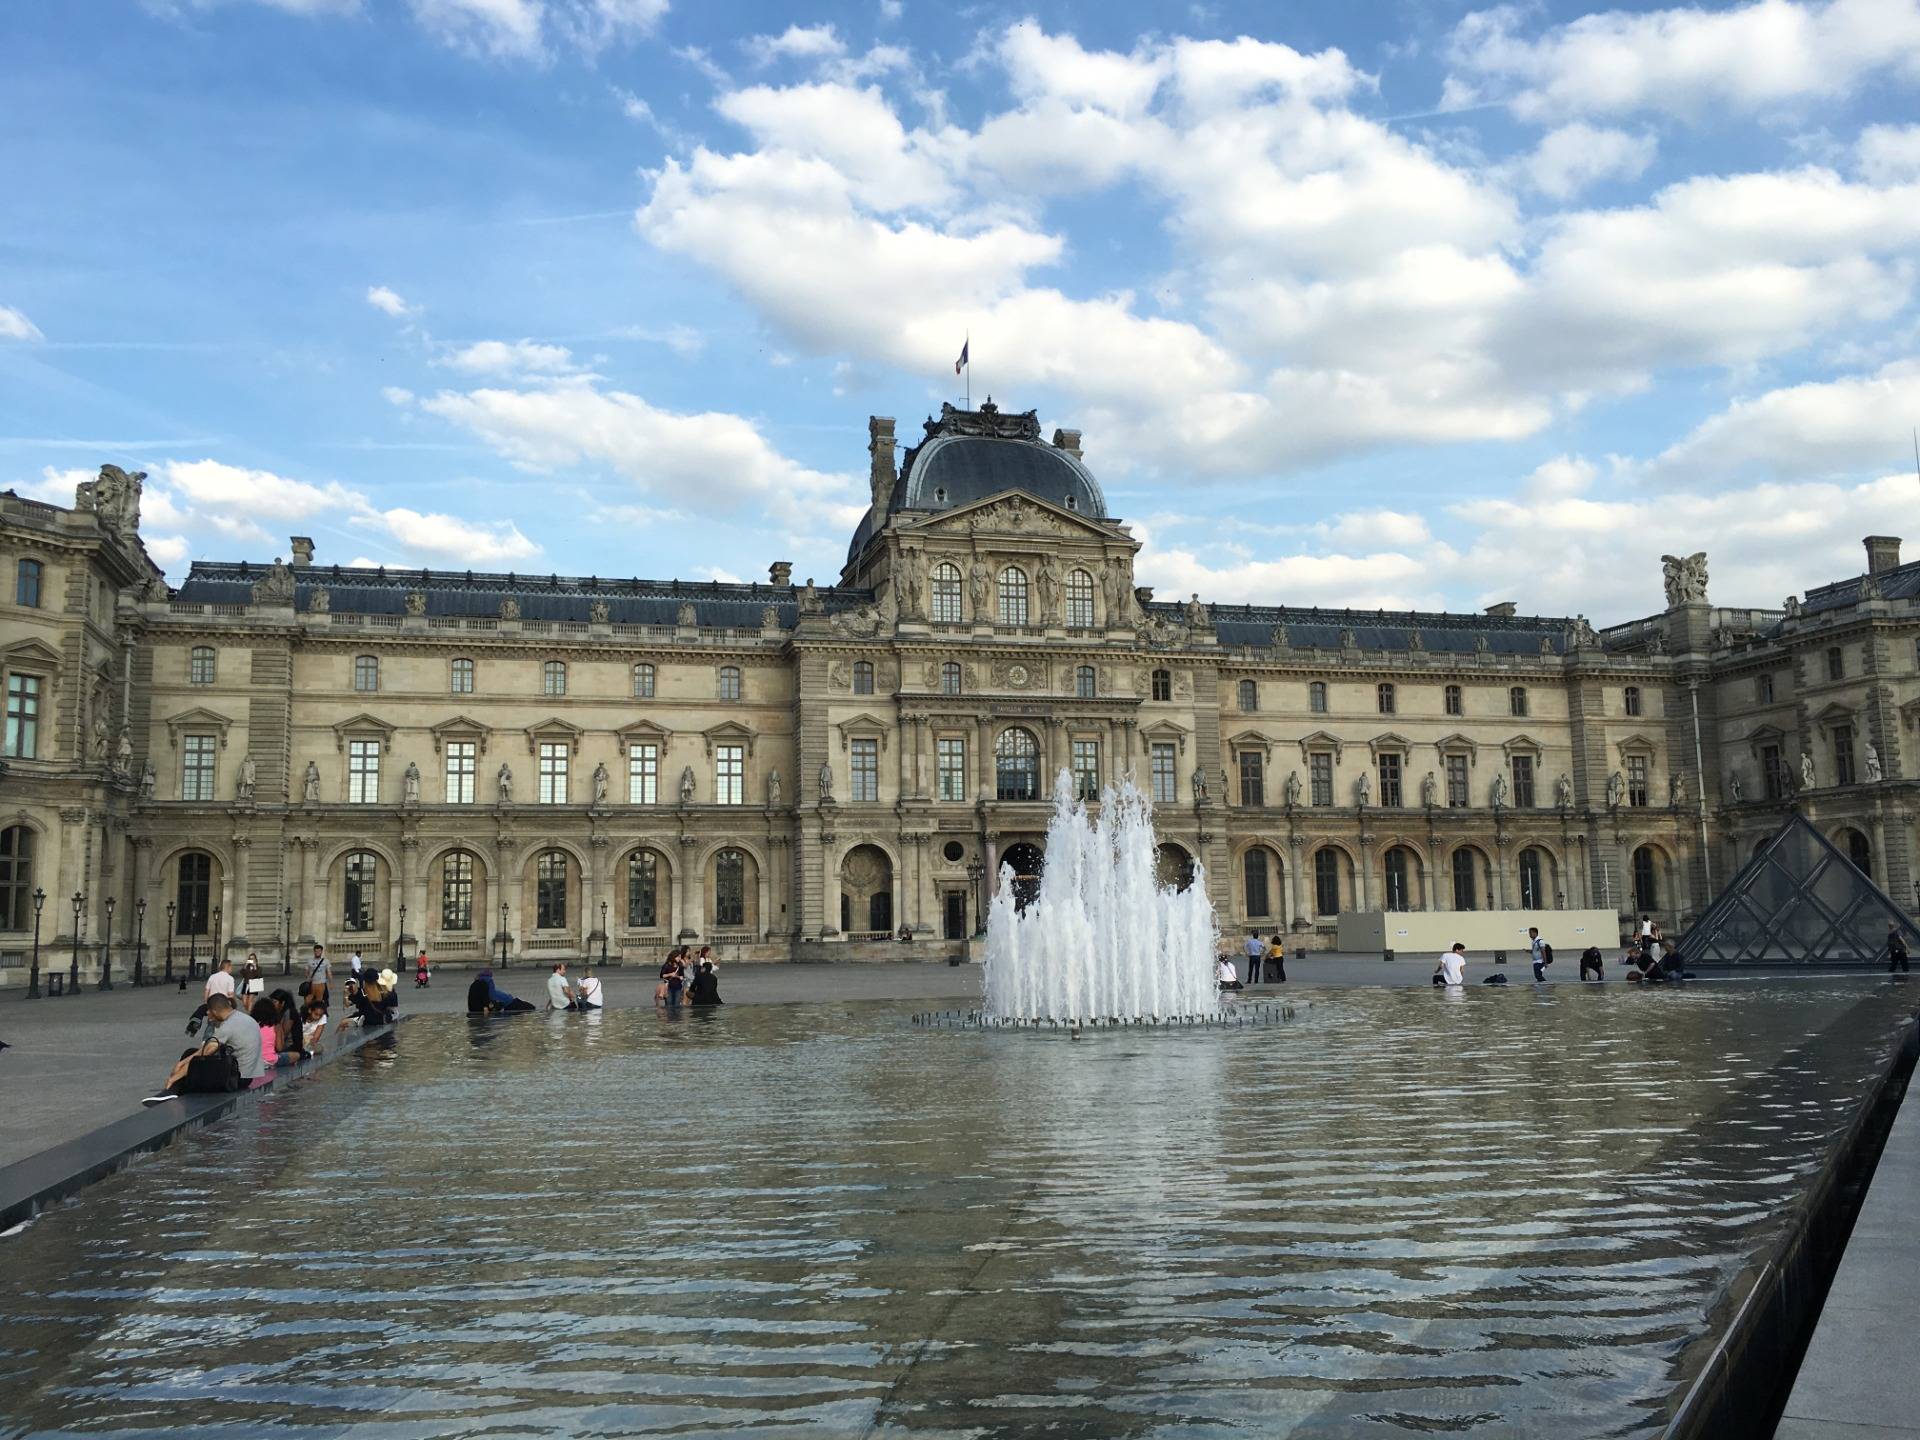 The Courtyard of the Louvre Museum